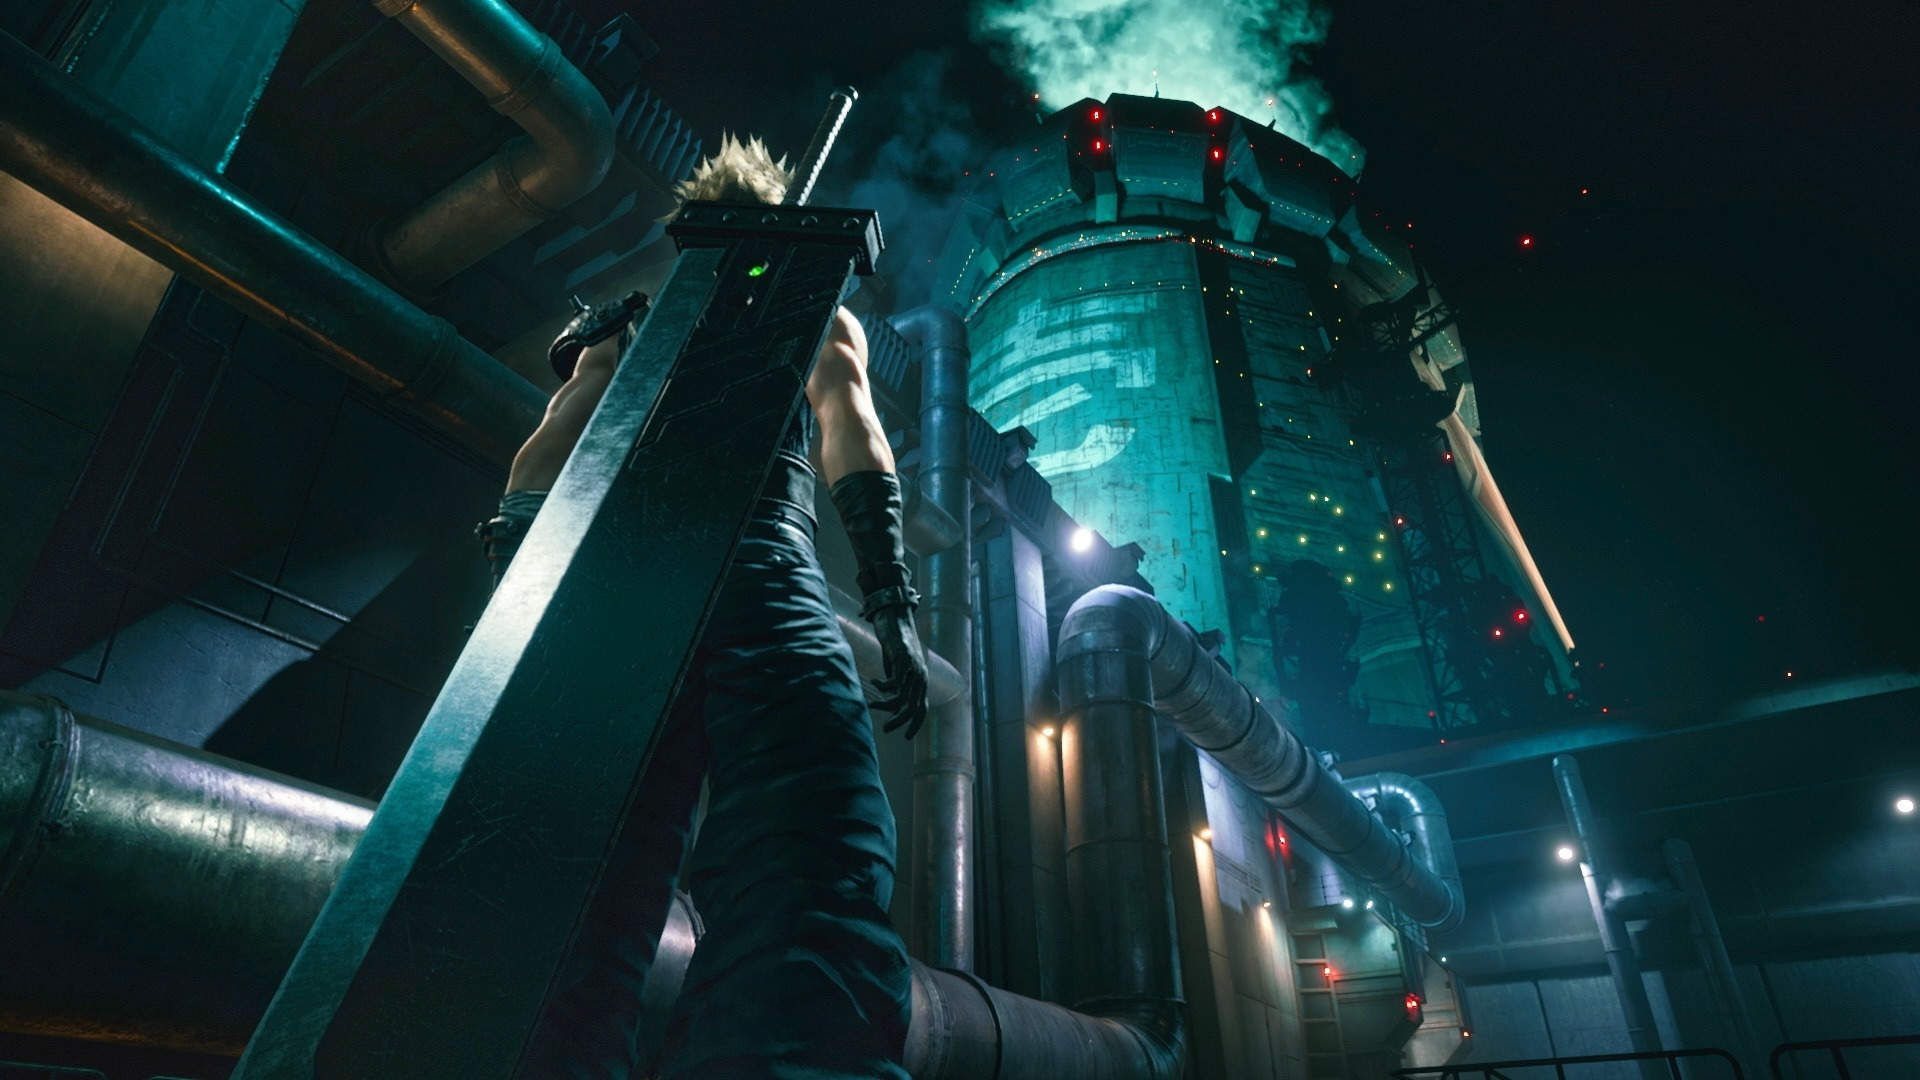 Final Fantasy VII Rebirth comes out in February - The Verge